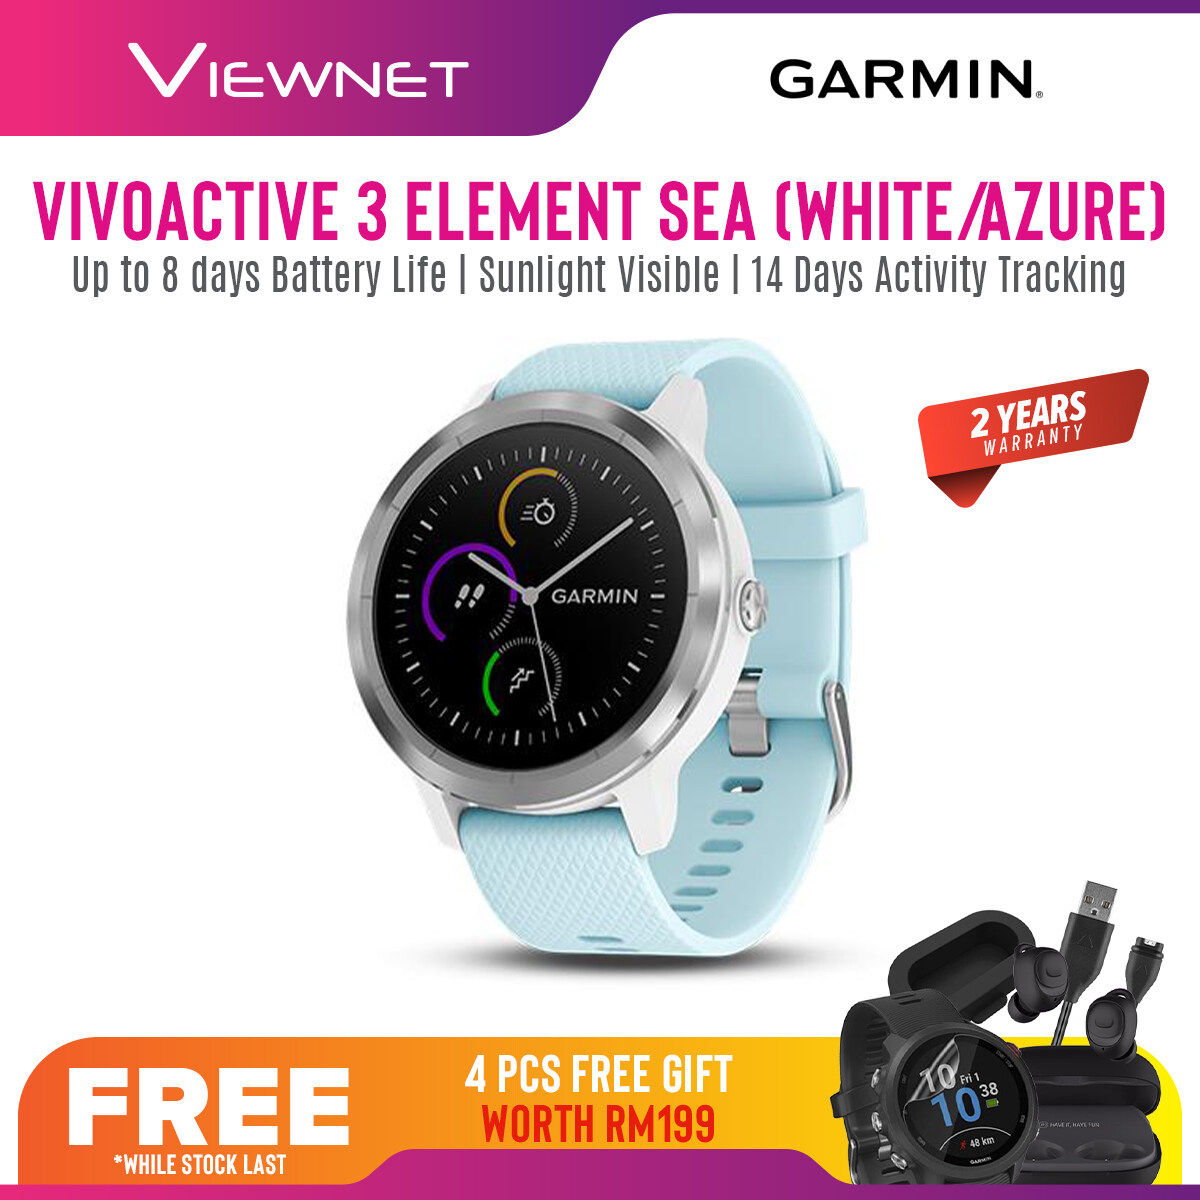 (NEW 2019) Garmin Vivoactive 3 Element GPS Smartwatch with Wrist-based Heart Rate Monitor